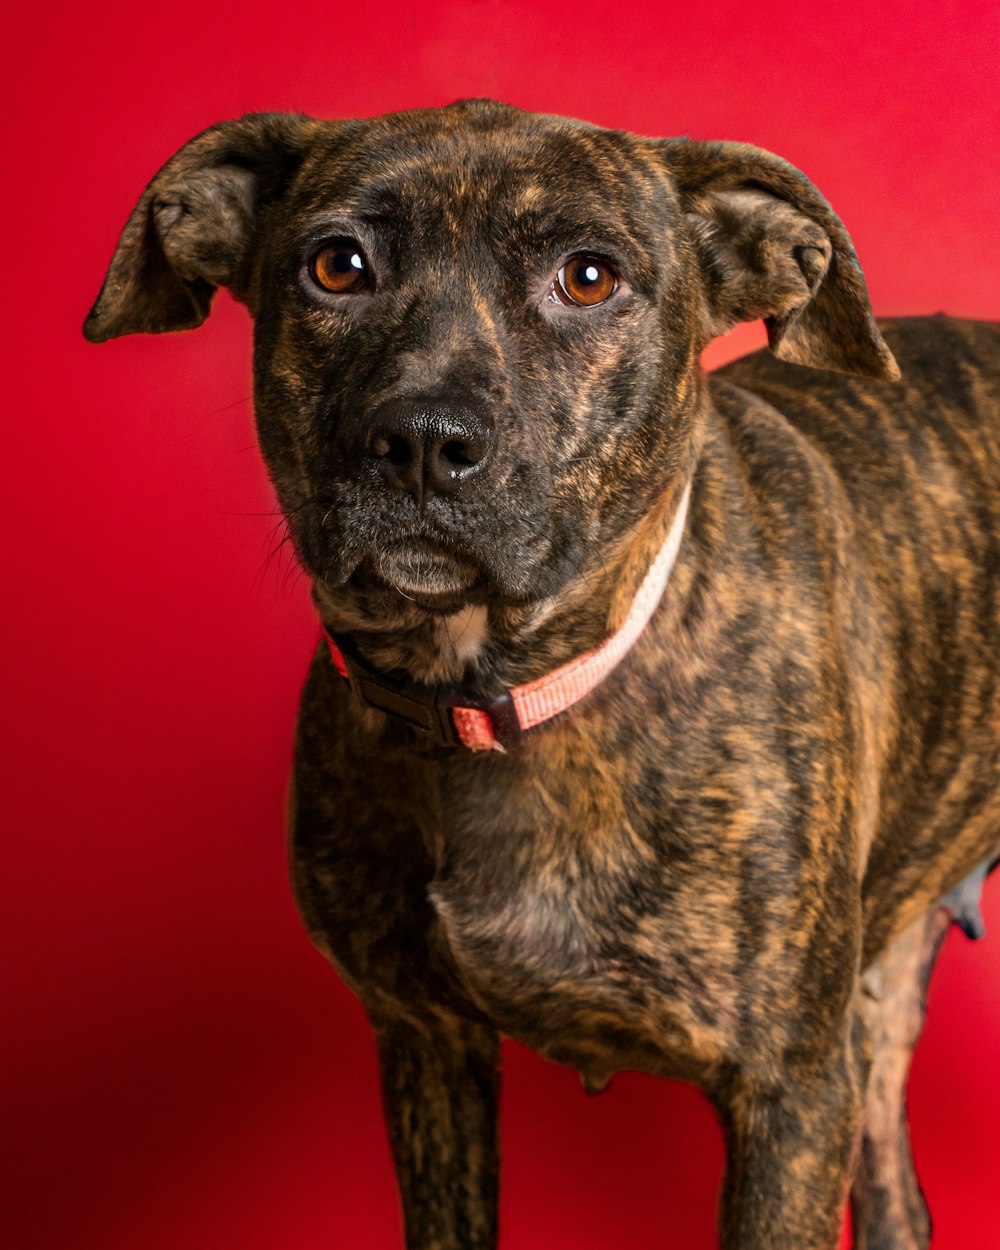 a close up of a dog on a red background